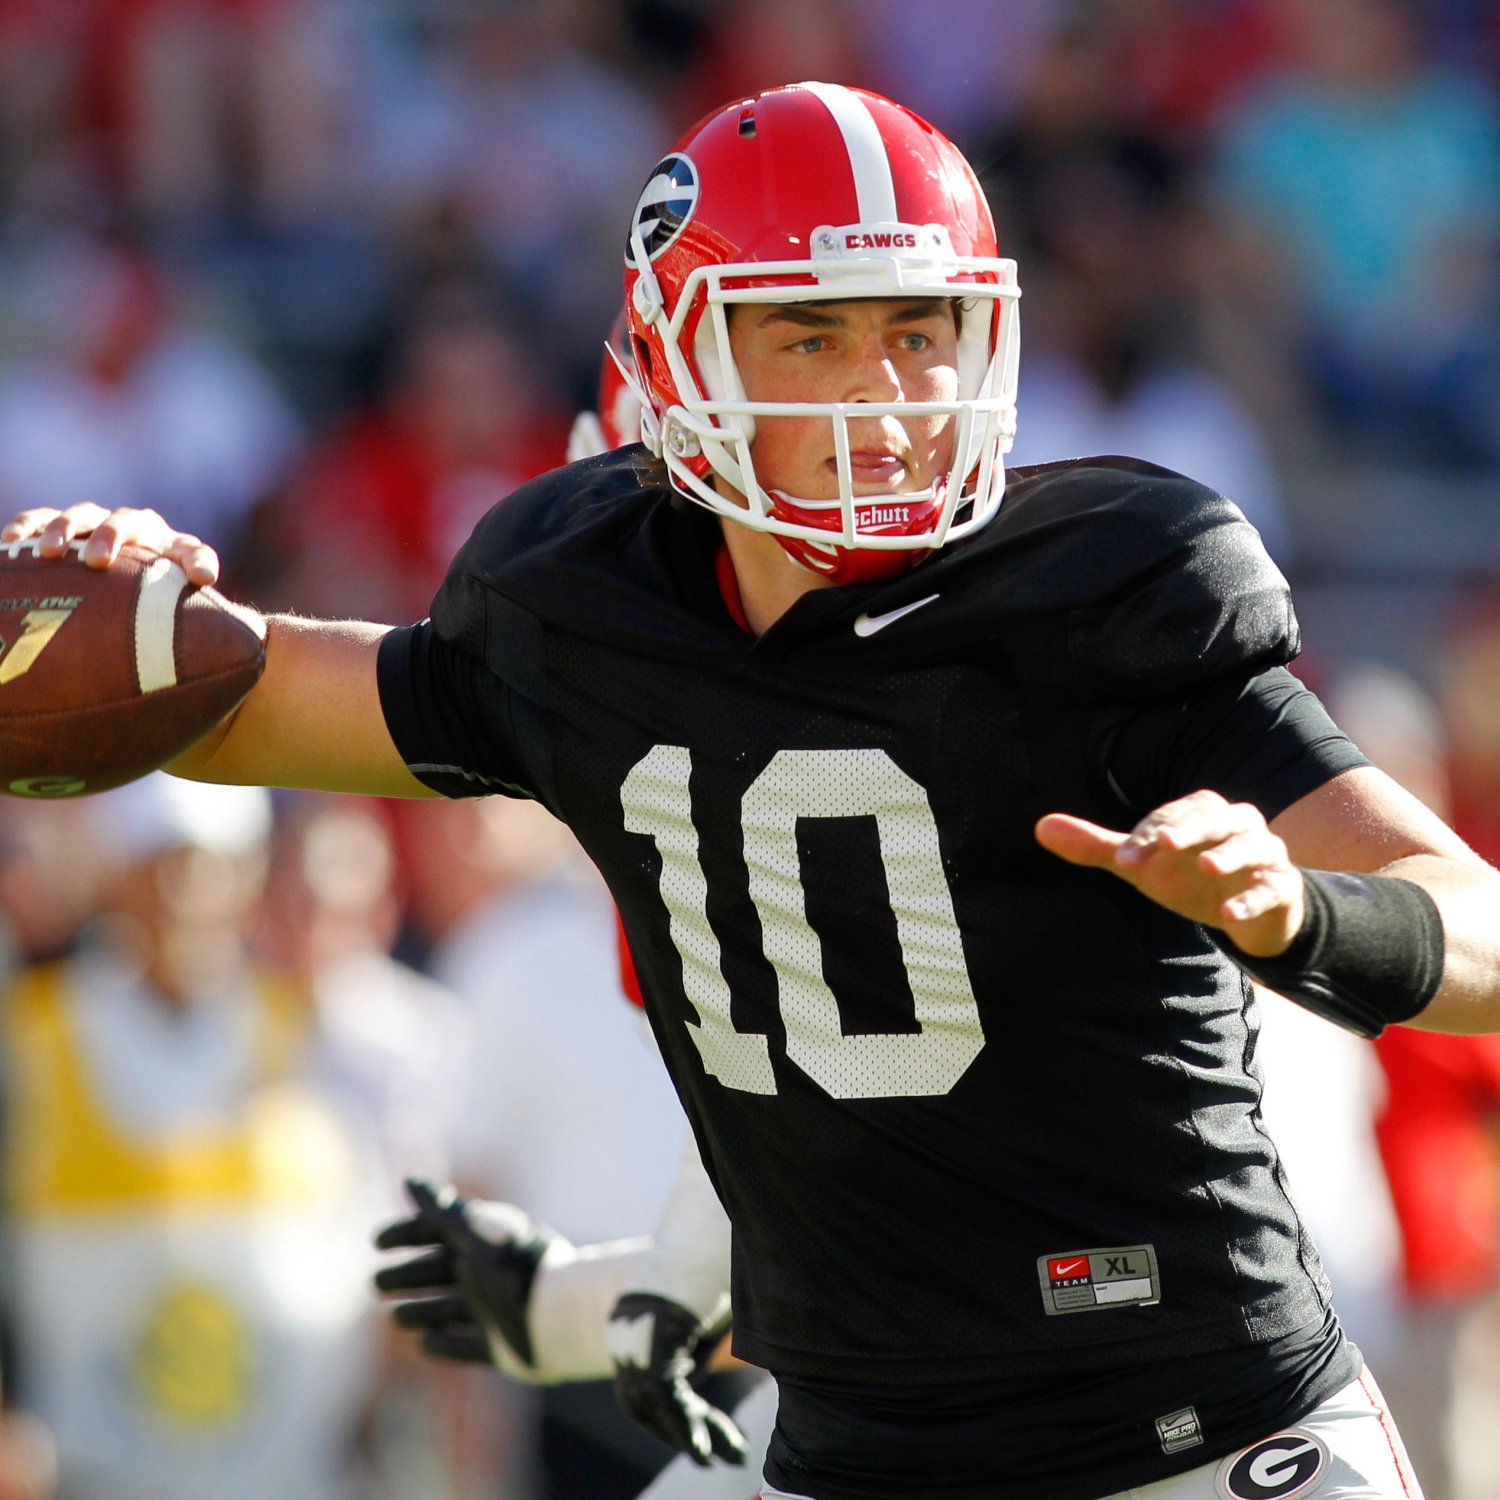 Georgia Football: Could Bulldogs Use 2-QB System in 2016? | Bleacher Report